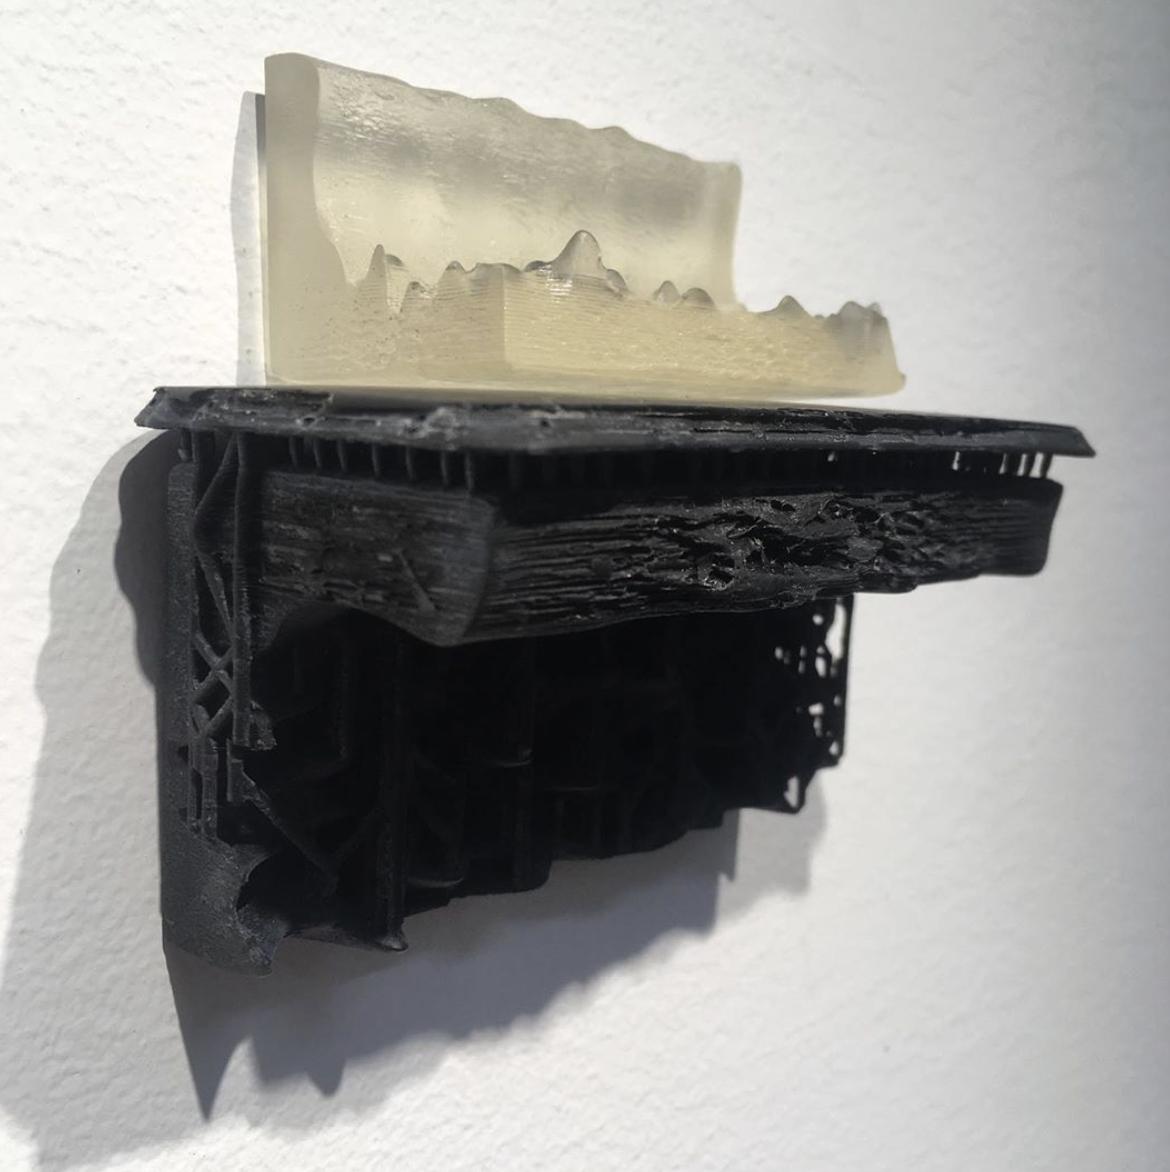 A clear representation of 3D printed waves rests on a black 3D printed mantle.